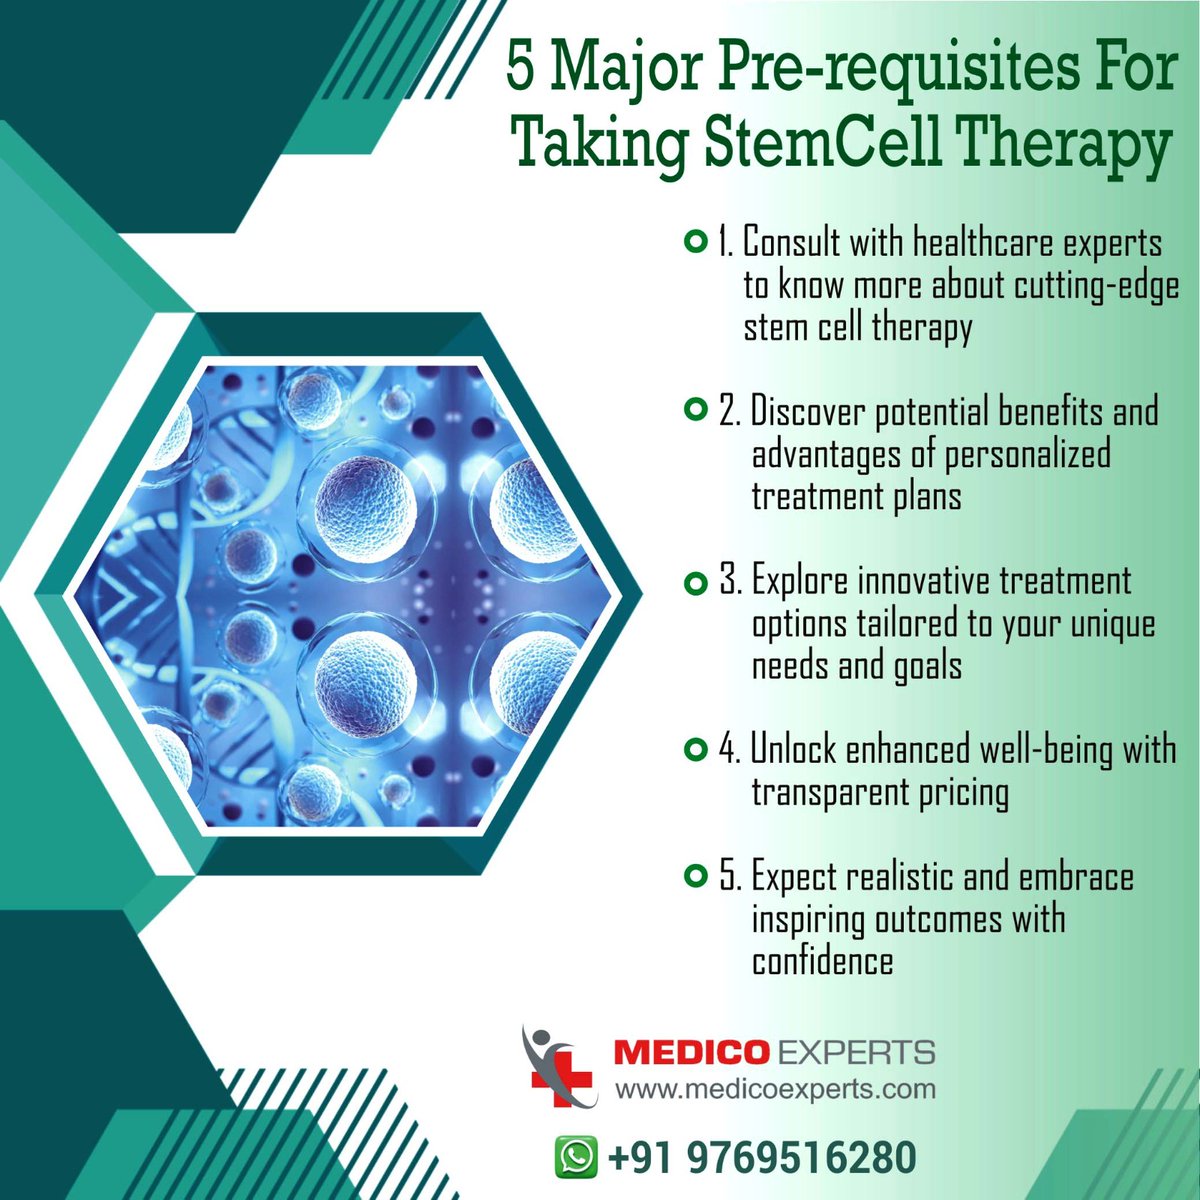 Unlocking the potential of stem cell therapy: Here are the 5 essential prerequisites you need to know before diving in. #StemCellTherapy #HealthcareInnovation